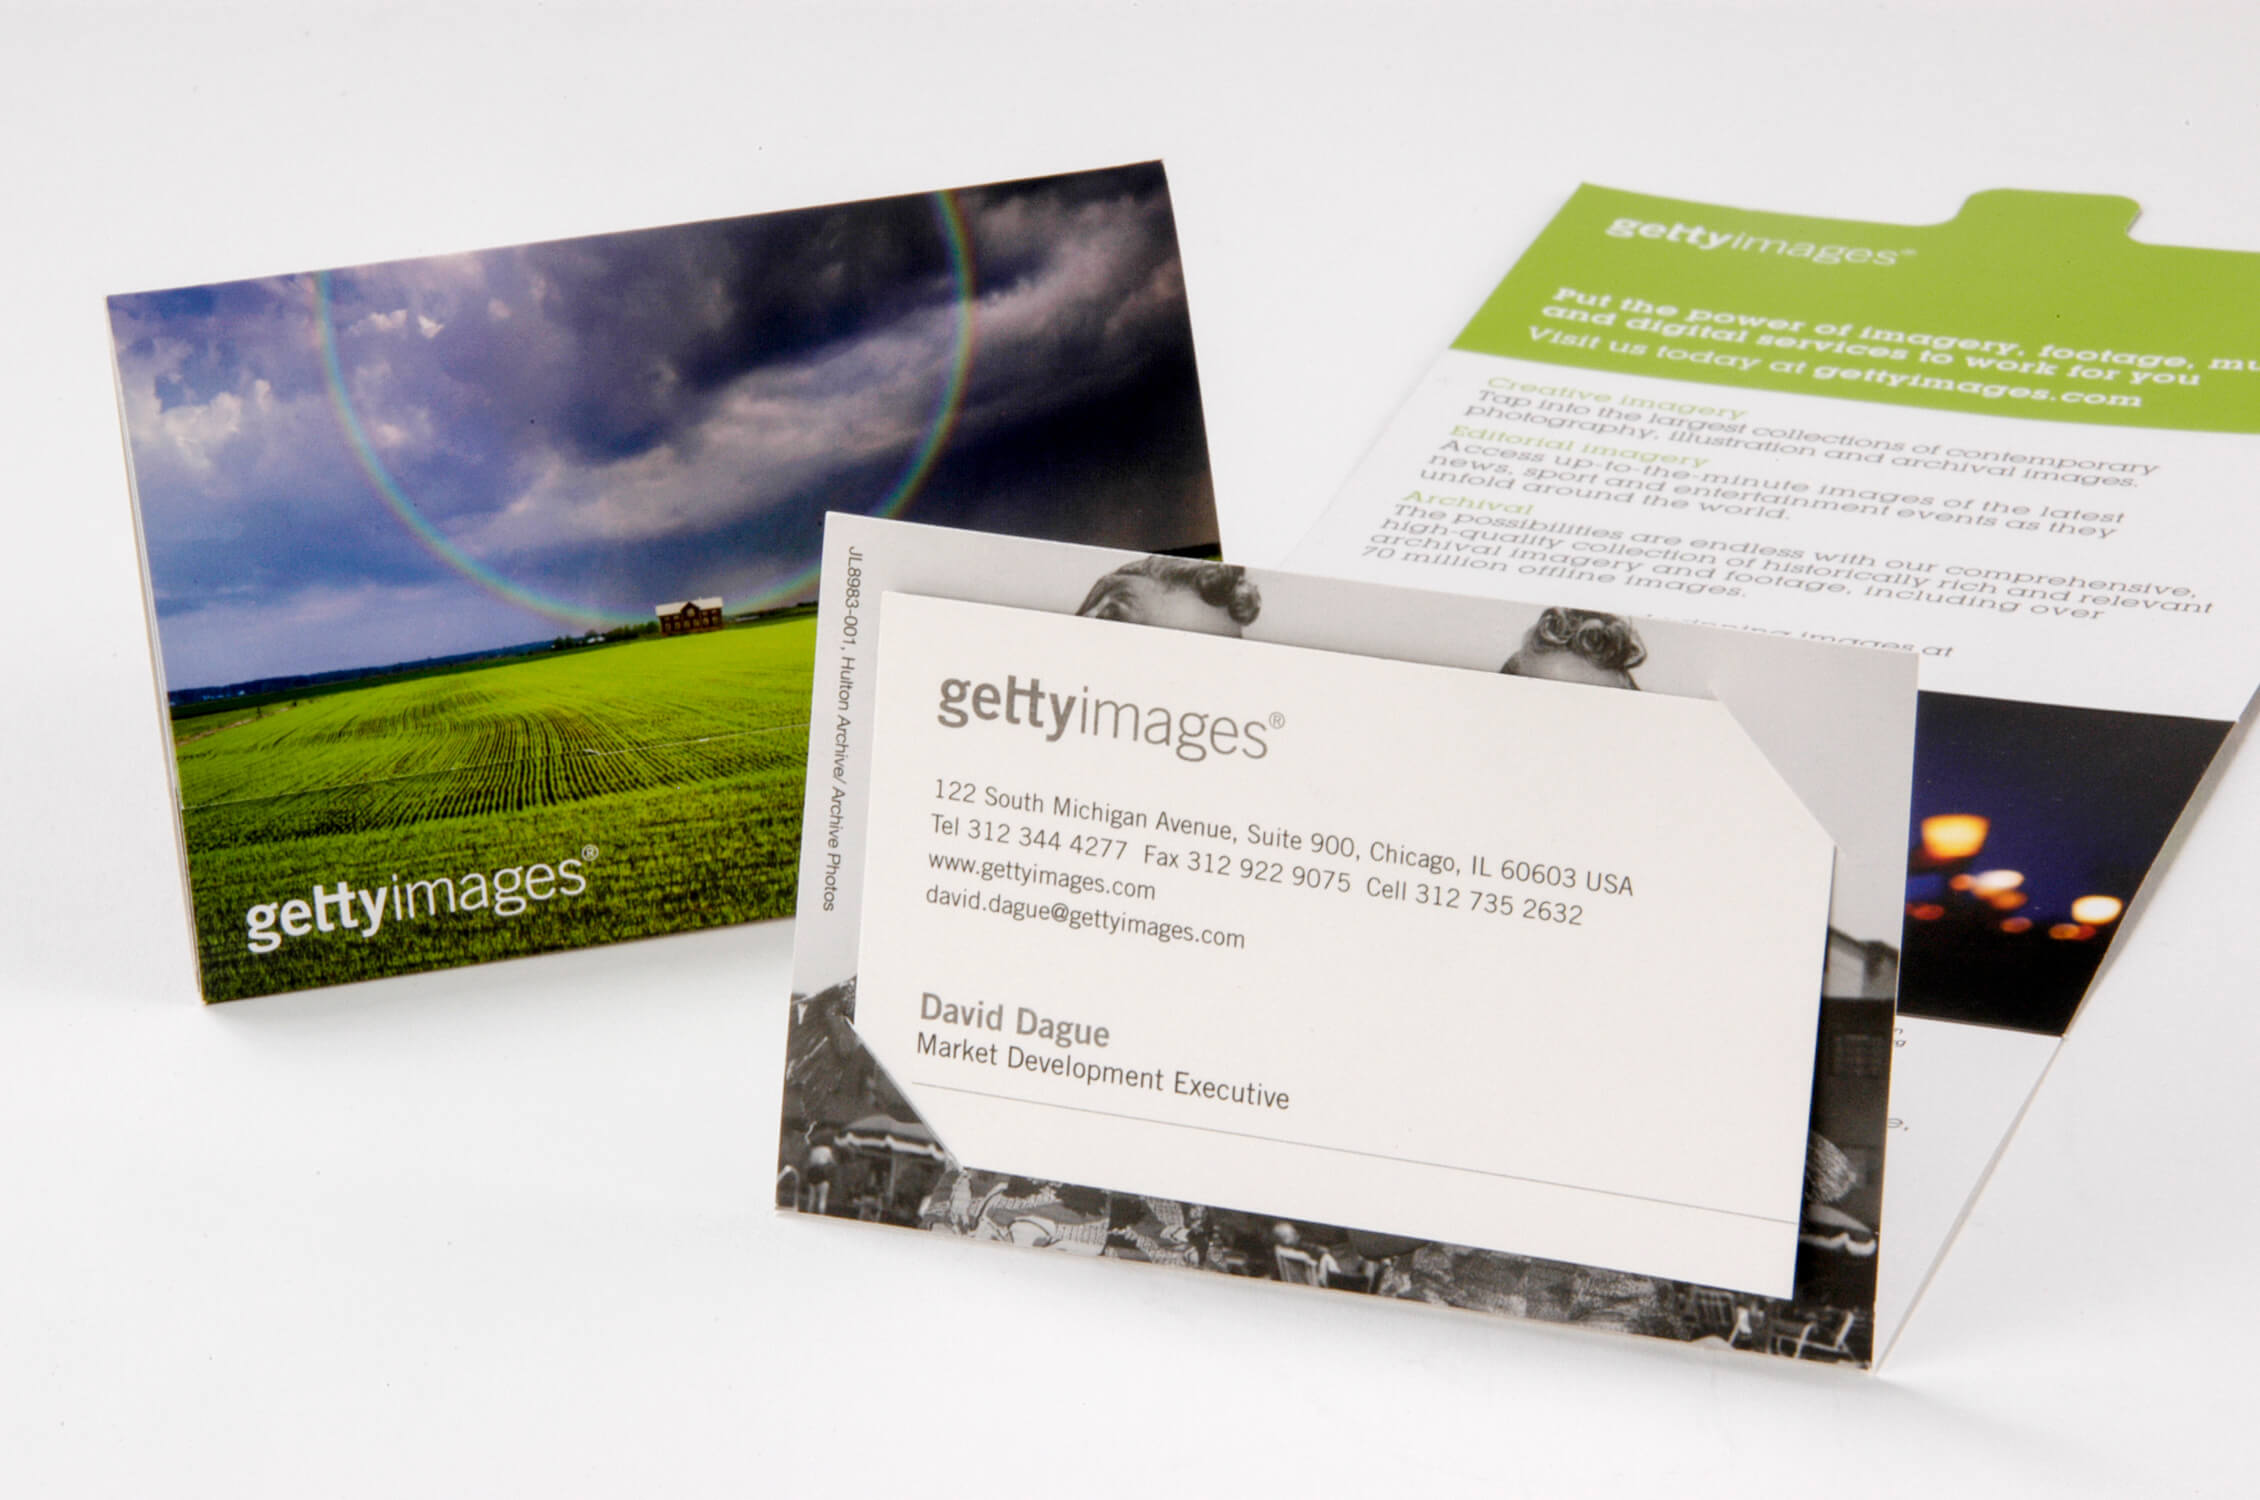 getty thank you business card promo image 01